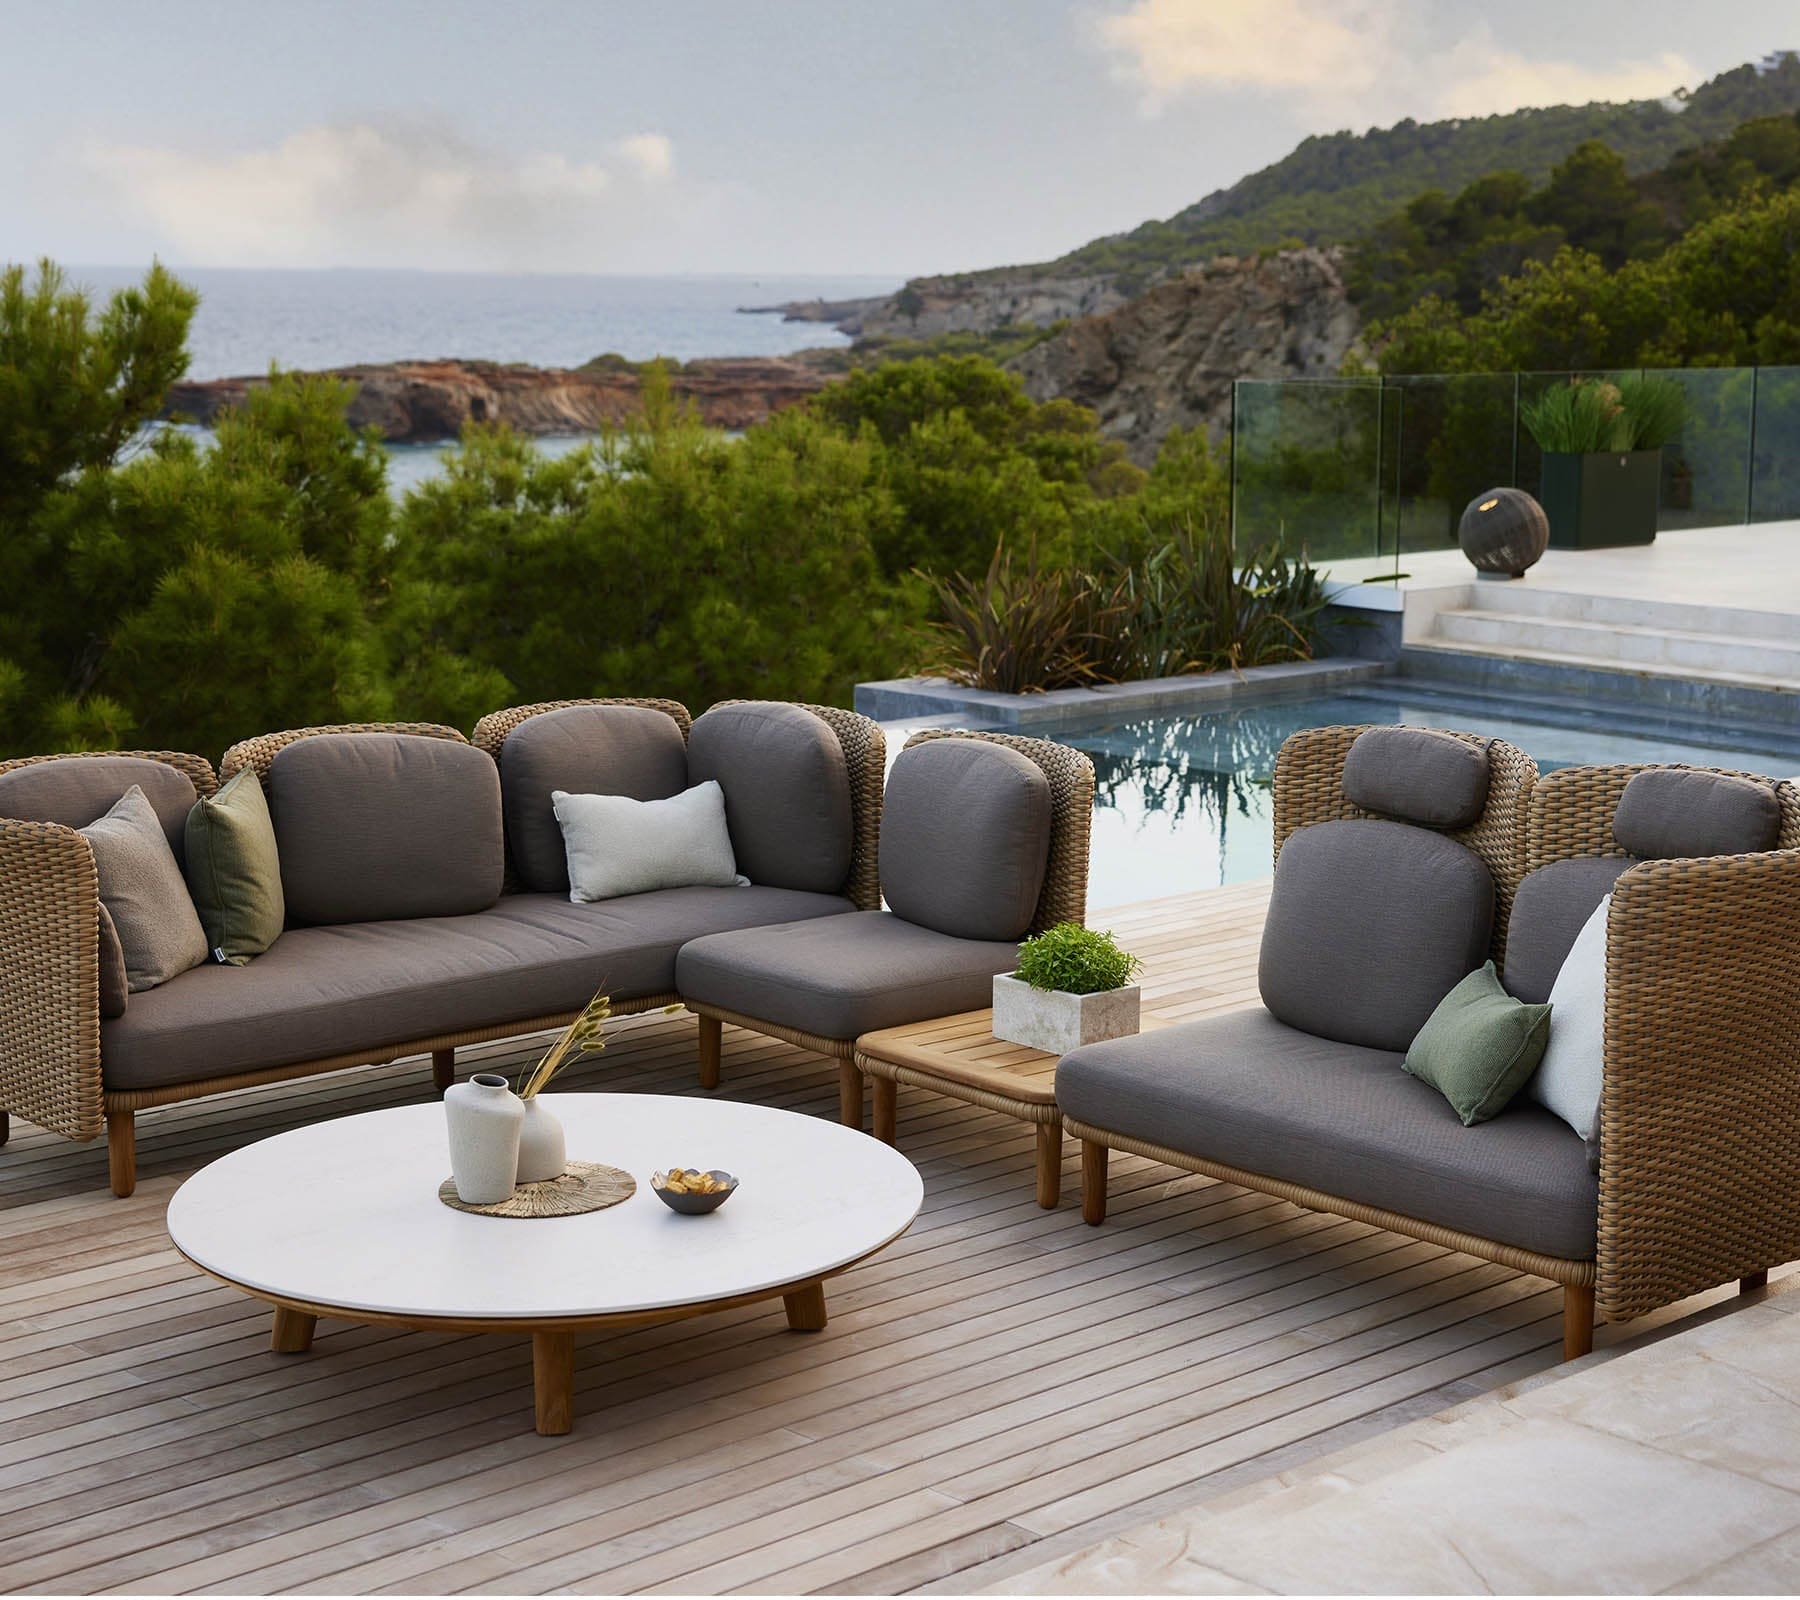 Arch 2-Seater Outdoor Sofa | Low Arm/Back